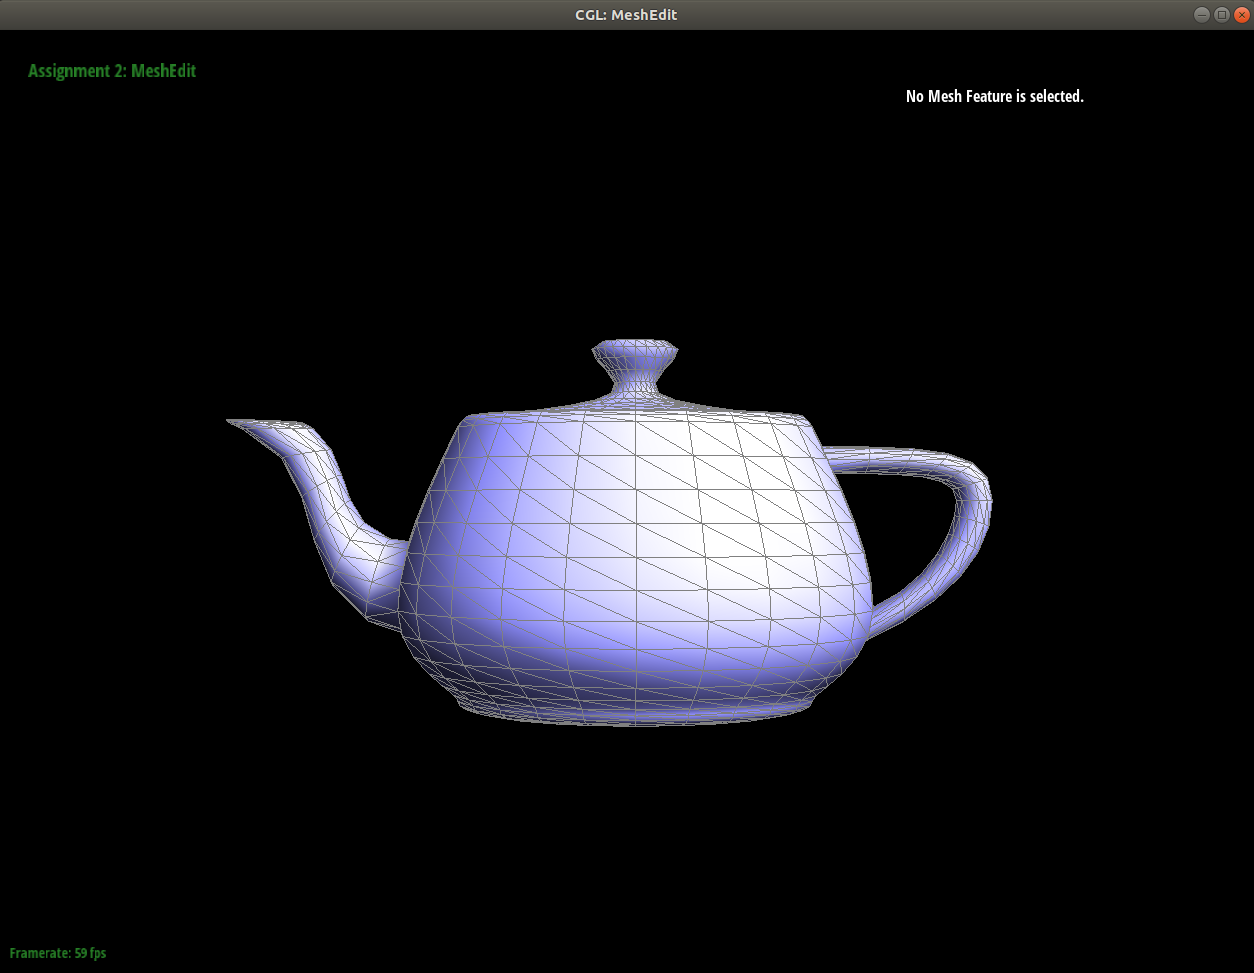 Teapot shading with area-weighted vertex normals